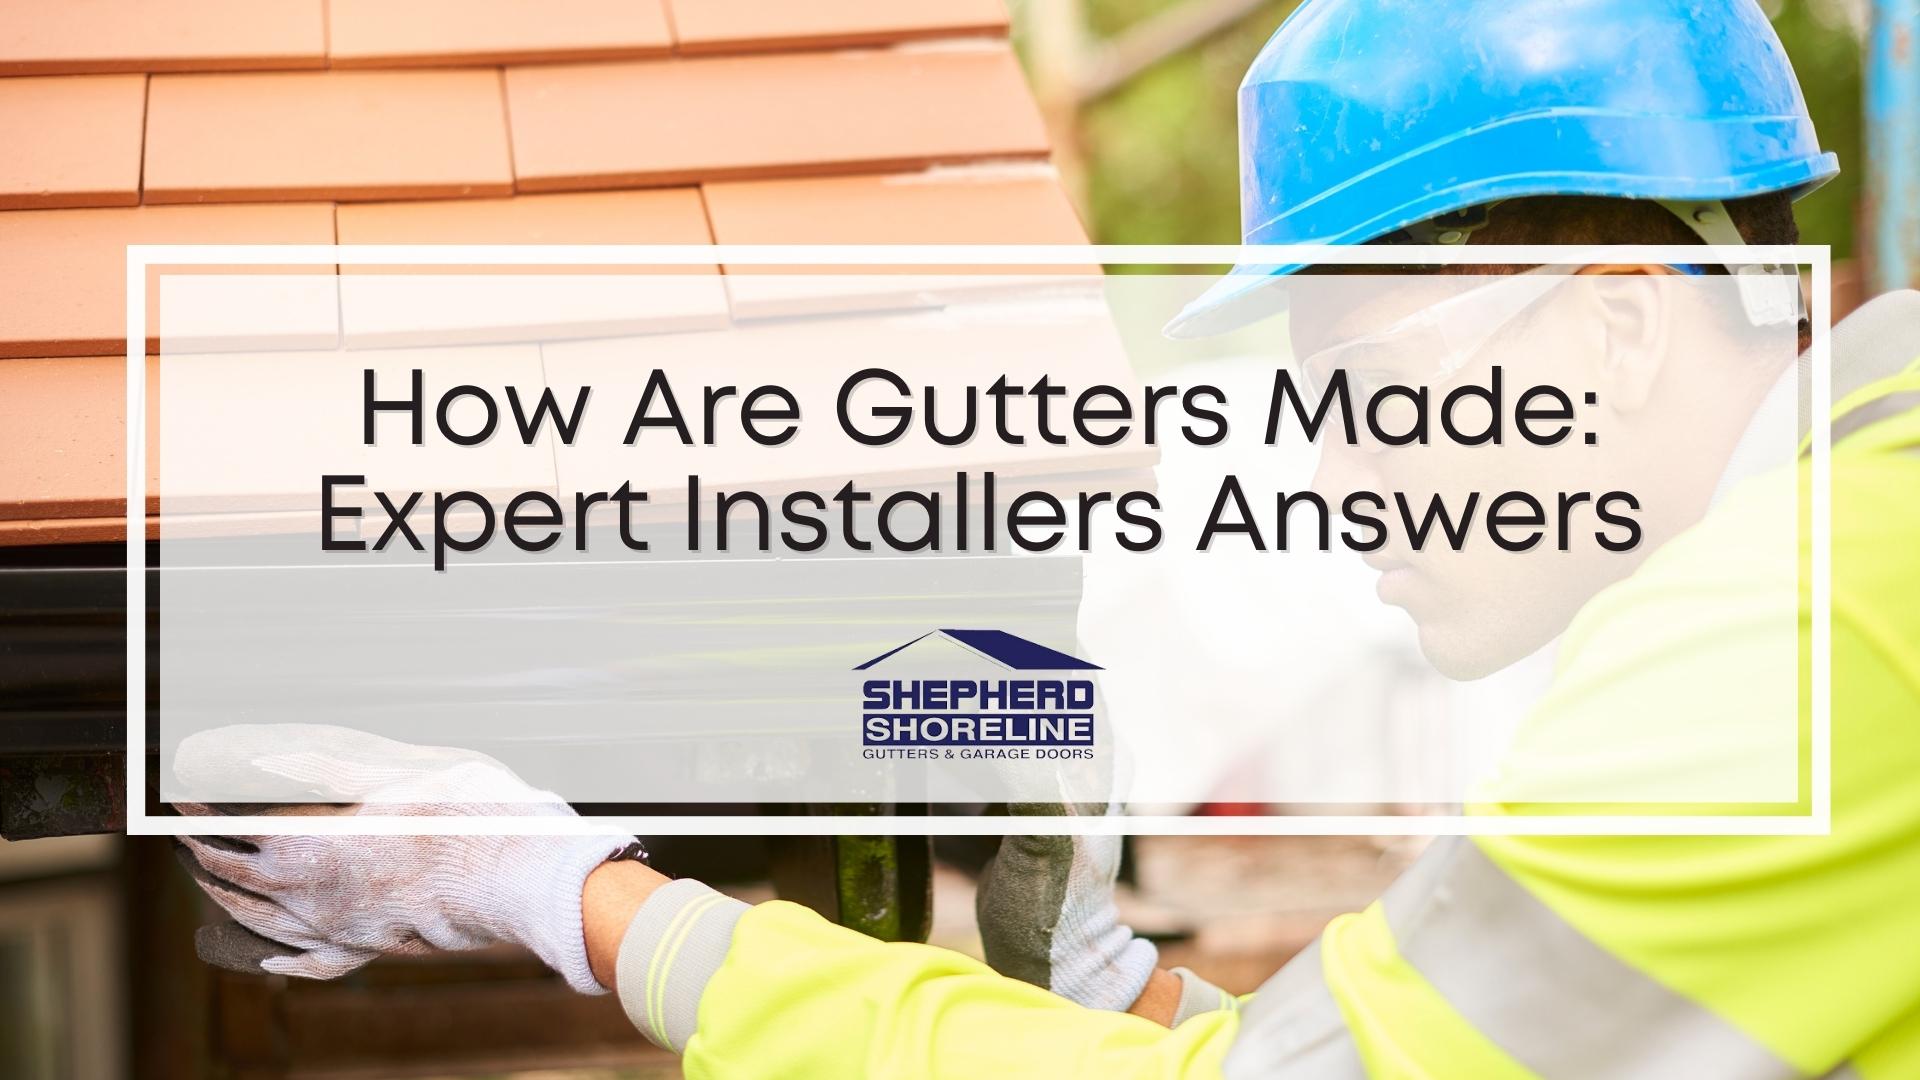 Featured image of how are gutters made